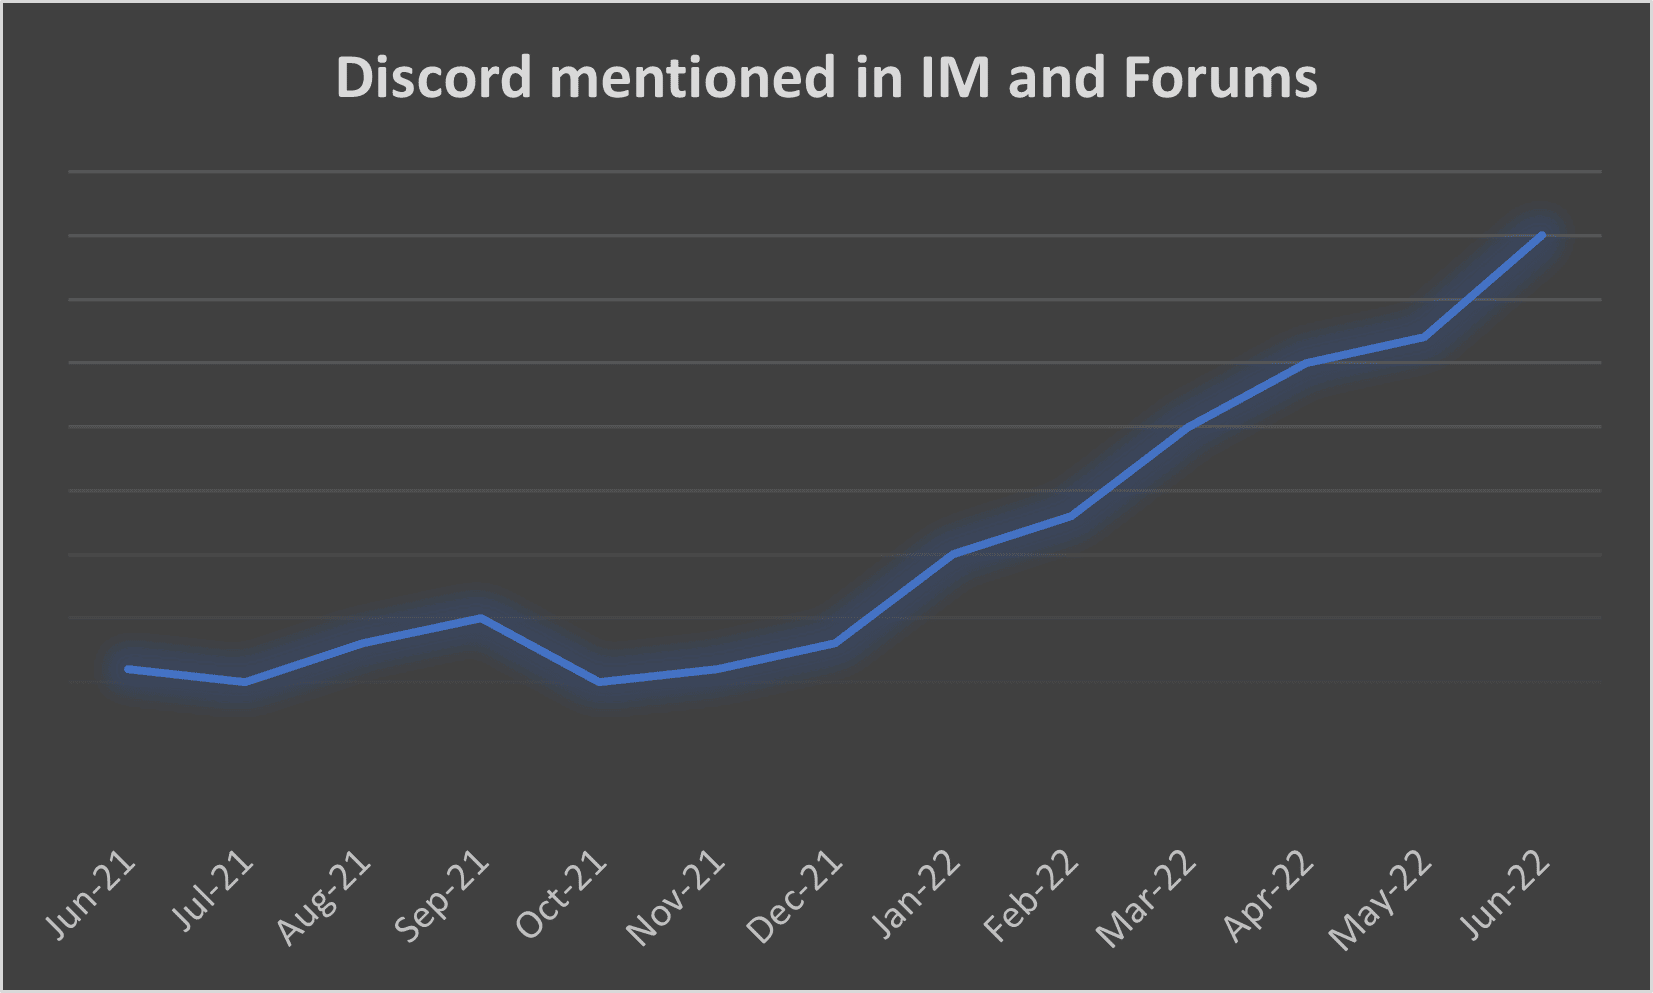 Total Discord mentions in Forums and IM platforms